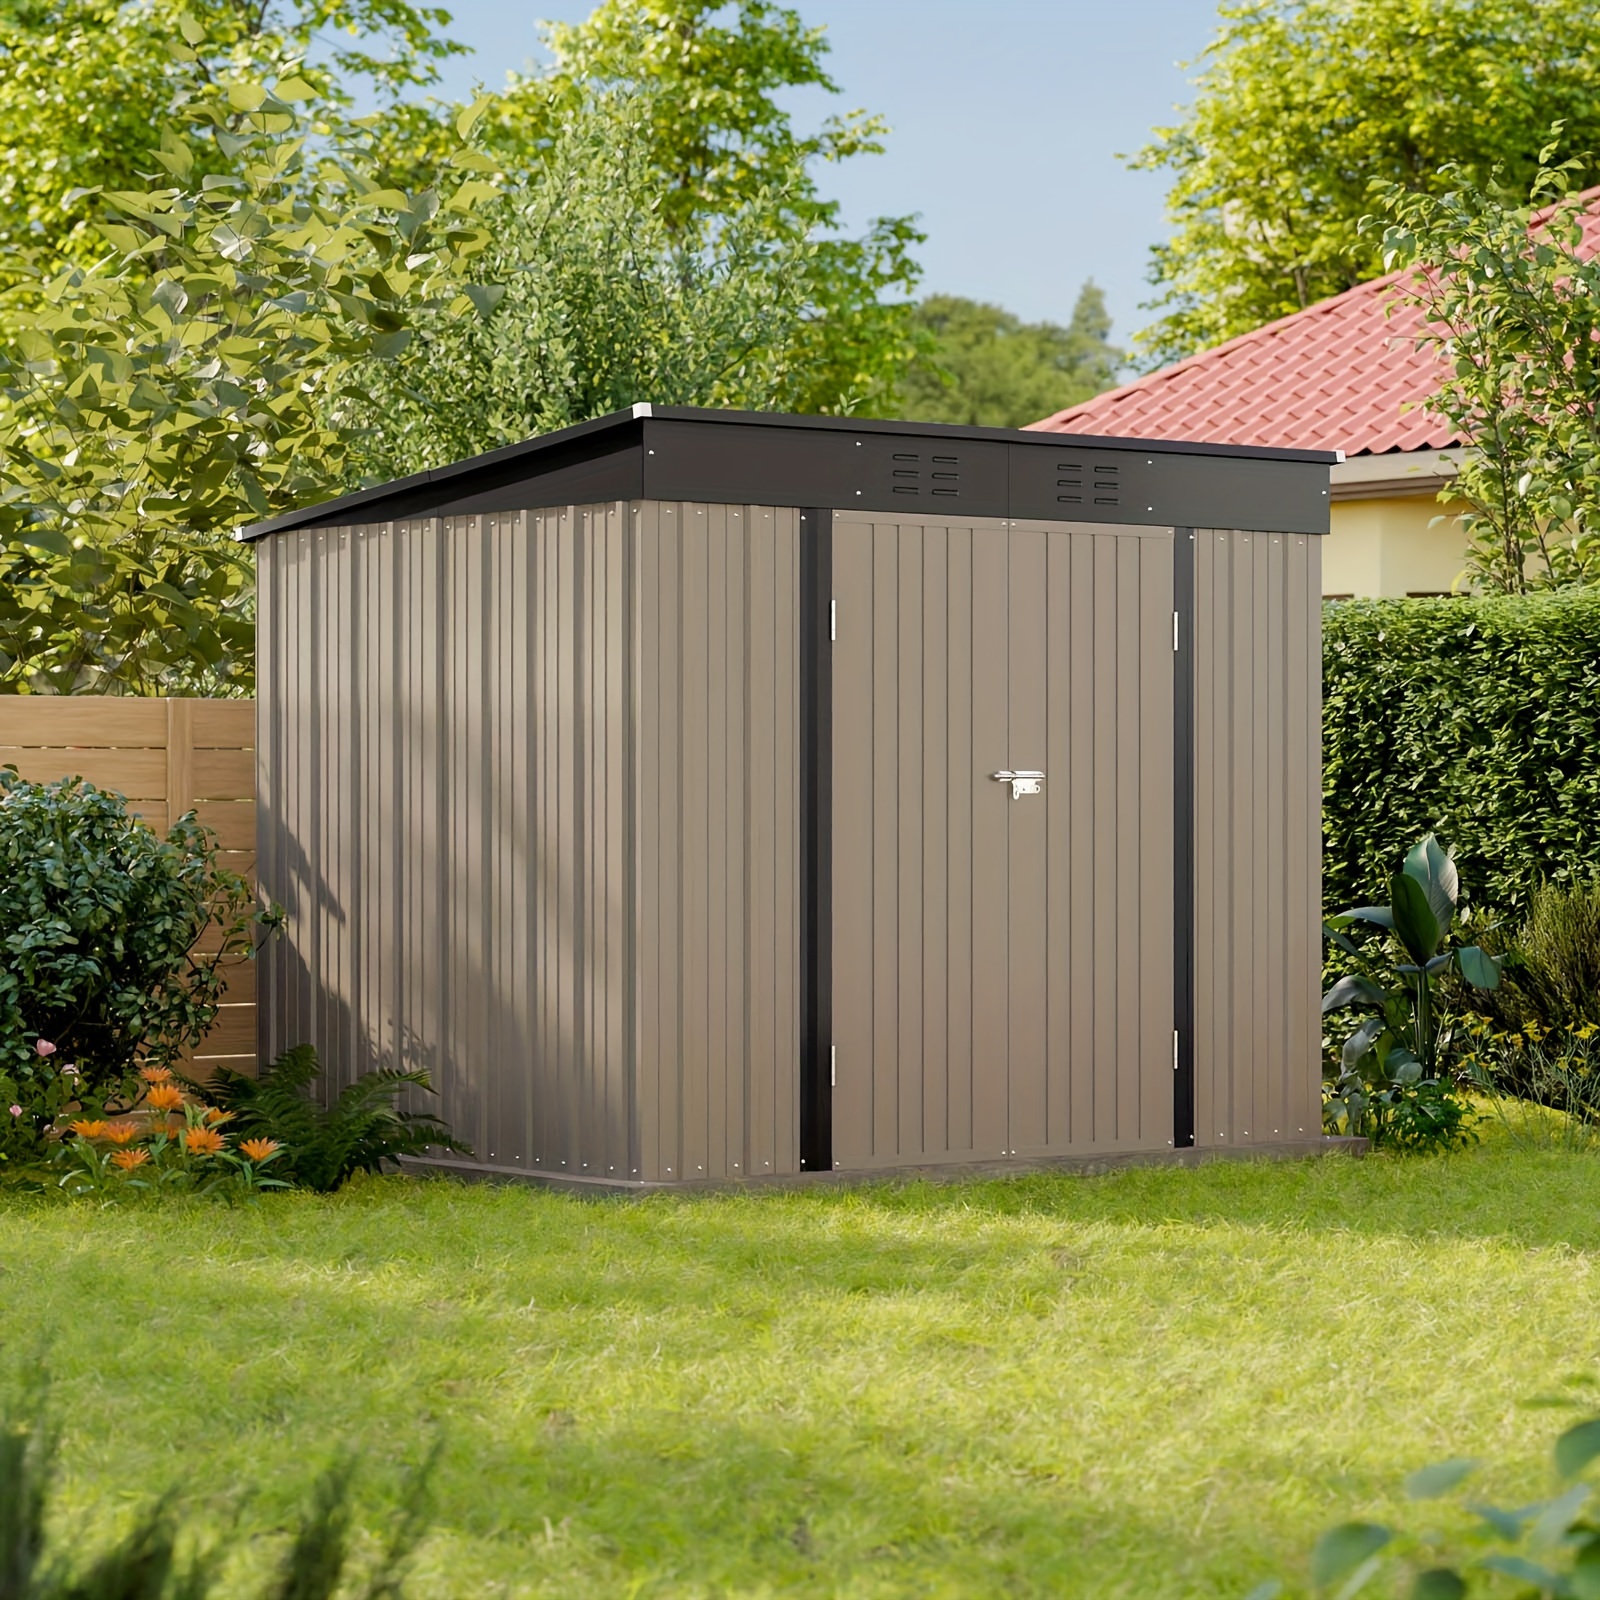 

8' X 6' Metal Outdoor Storage Shed, Metal Shed With Vents And Lock, Water-resistance And Uv-resistance Tool Shed For Lawn, Patio, Or Backyard Storage Needs